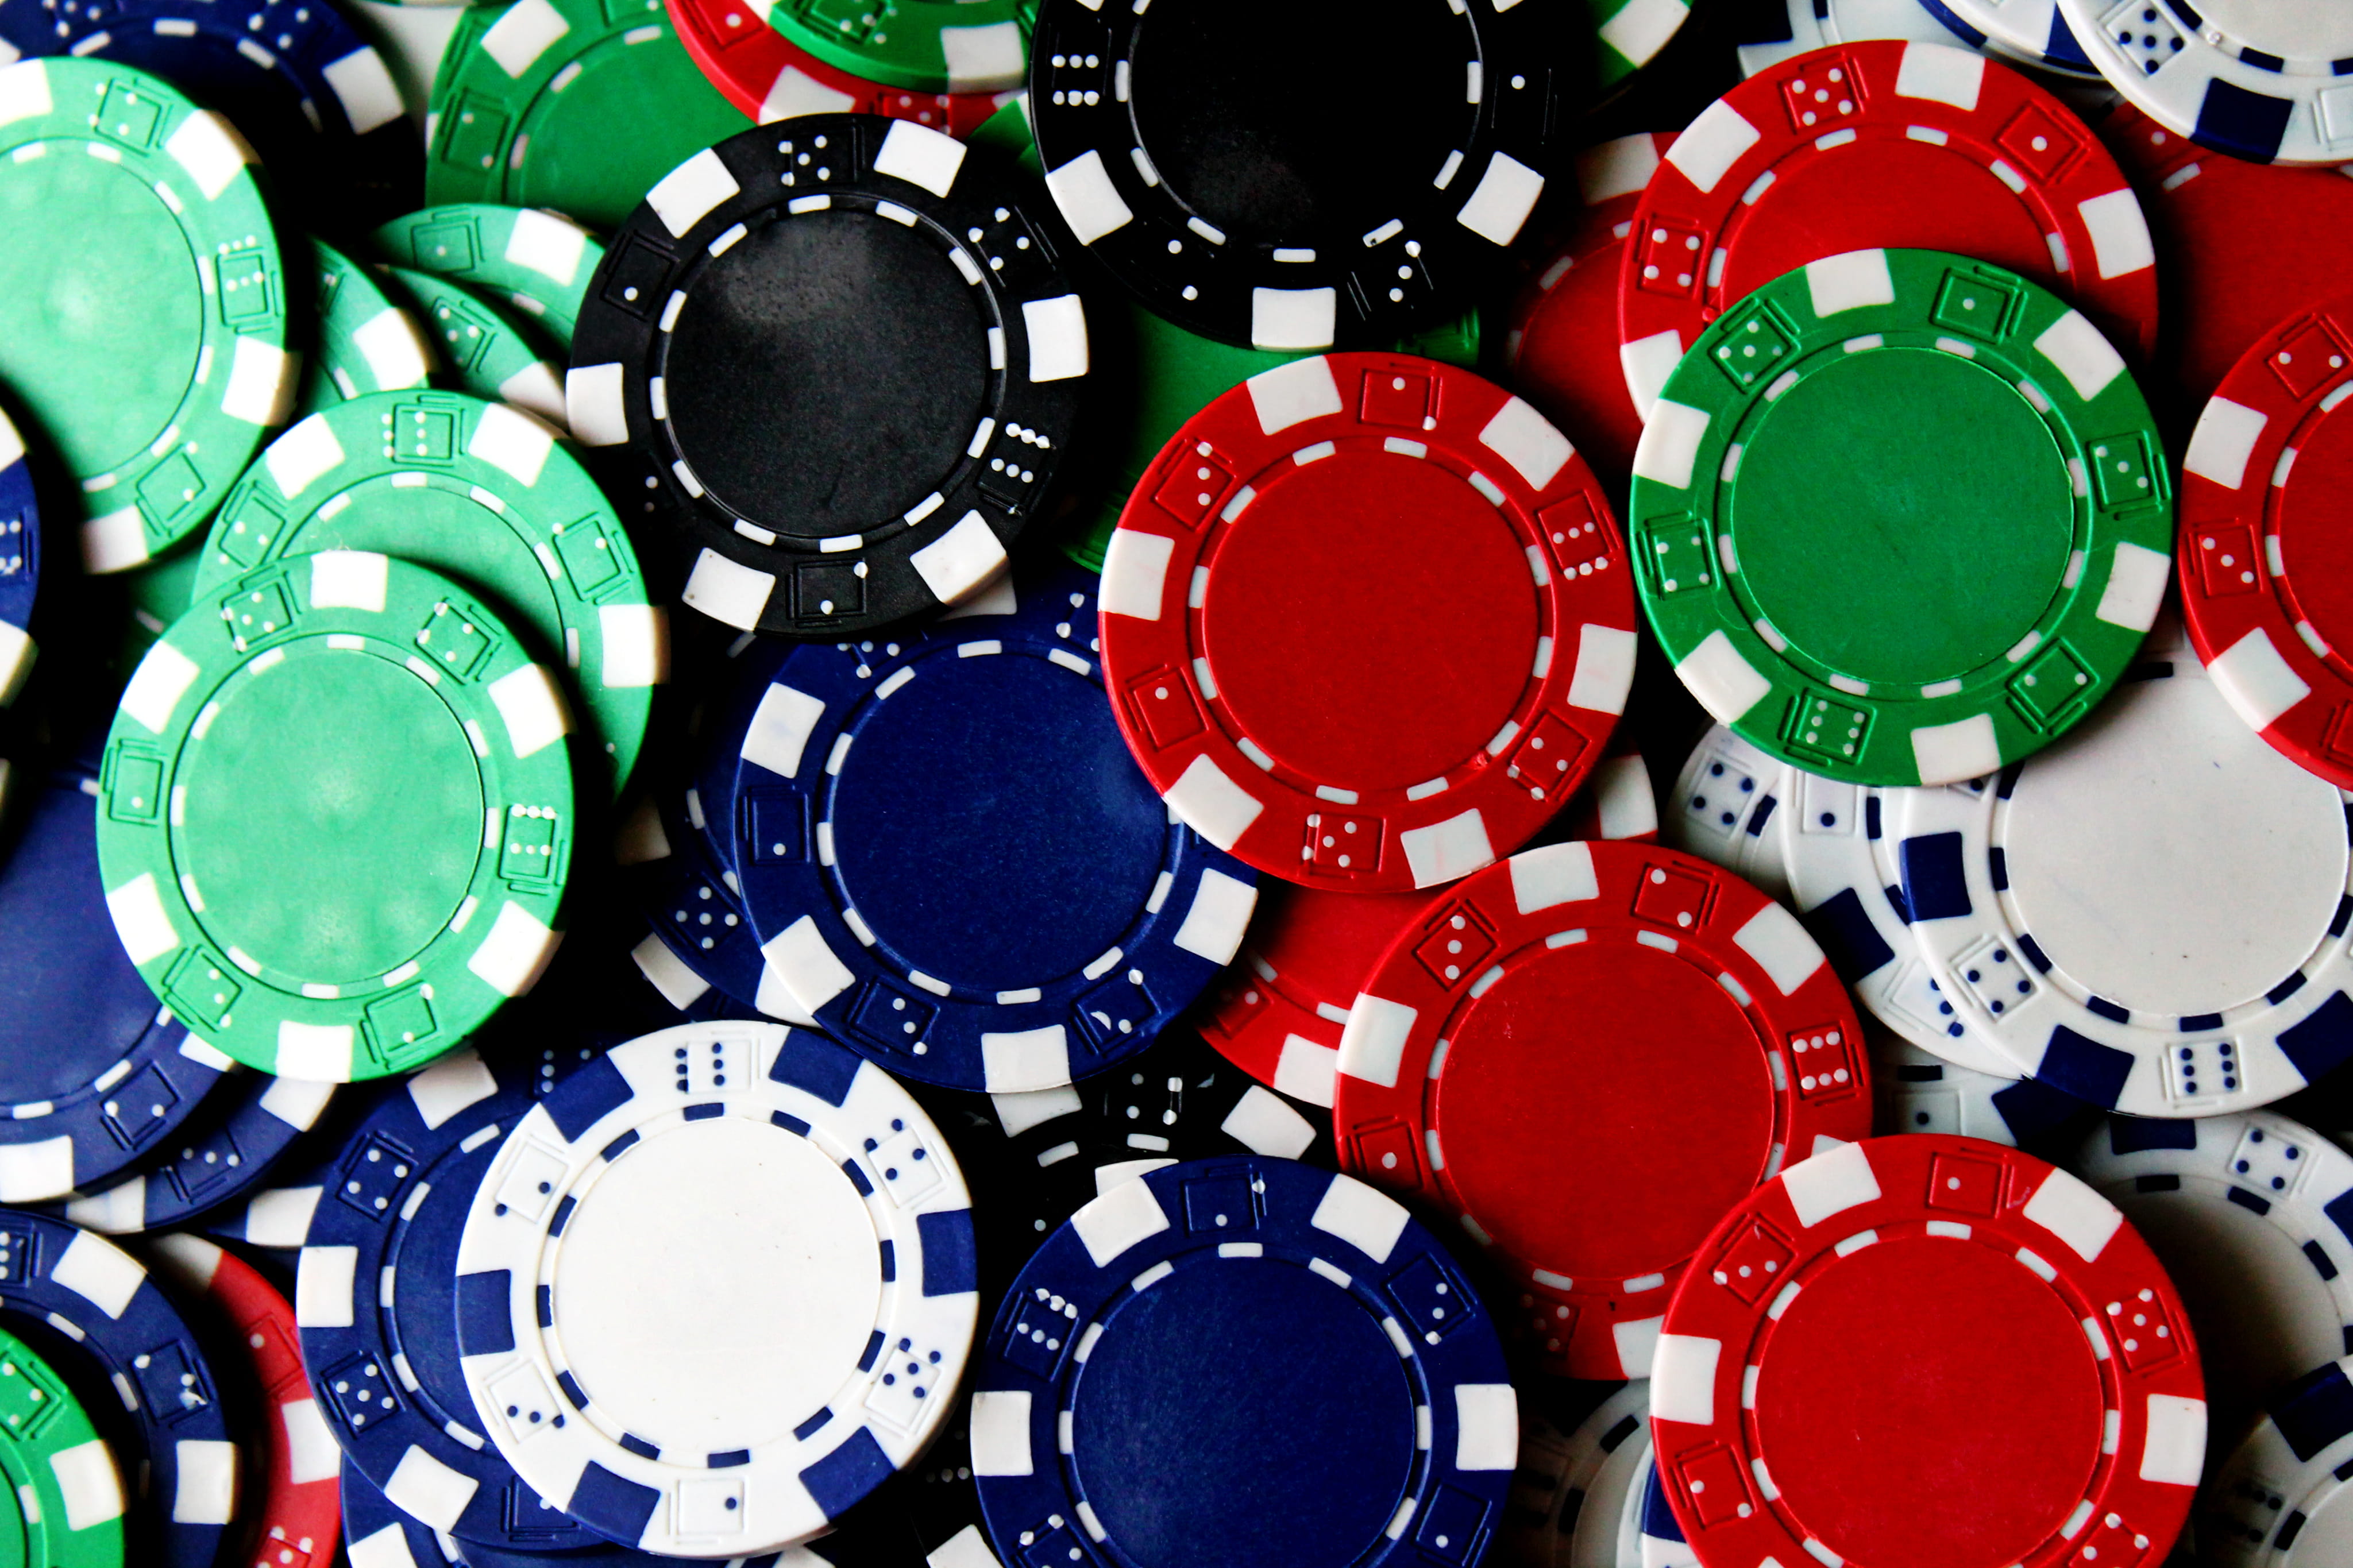 scattered poker chips, gambling, game, money, wristwatch, tower